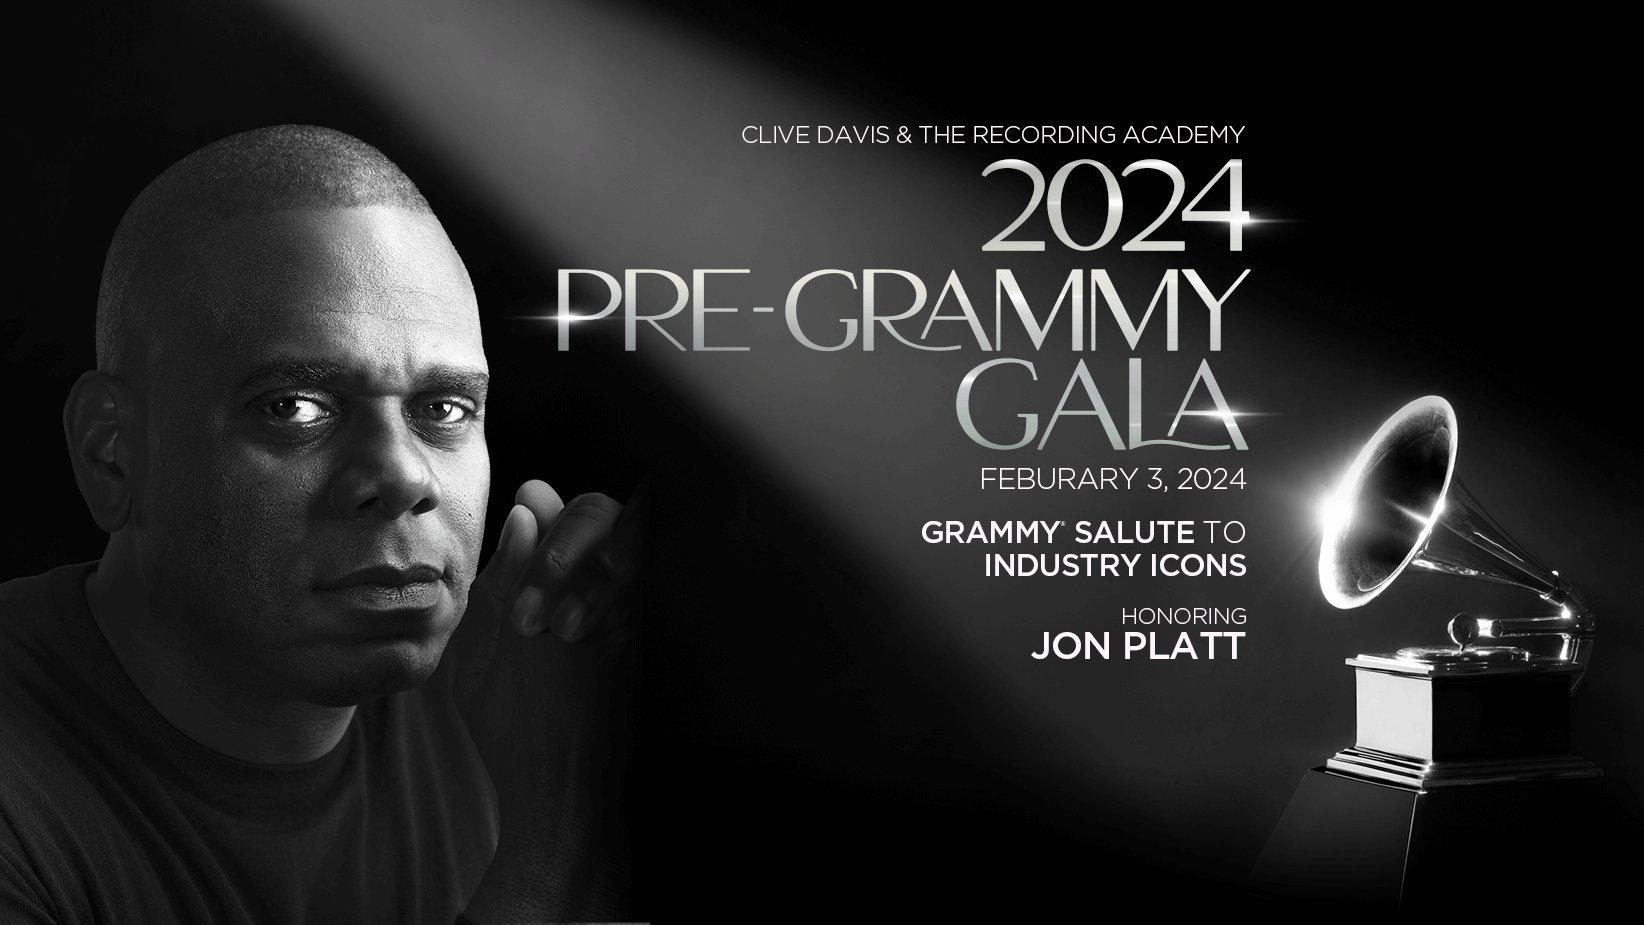 Sony Music Publishing Chairman & CEO Jon Platt will receive the GRAMMY Salute To Industry Icons honor at the 2024 Pre-GRAMMY Gala